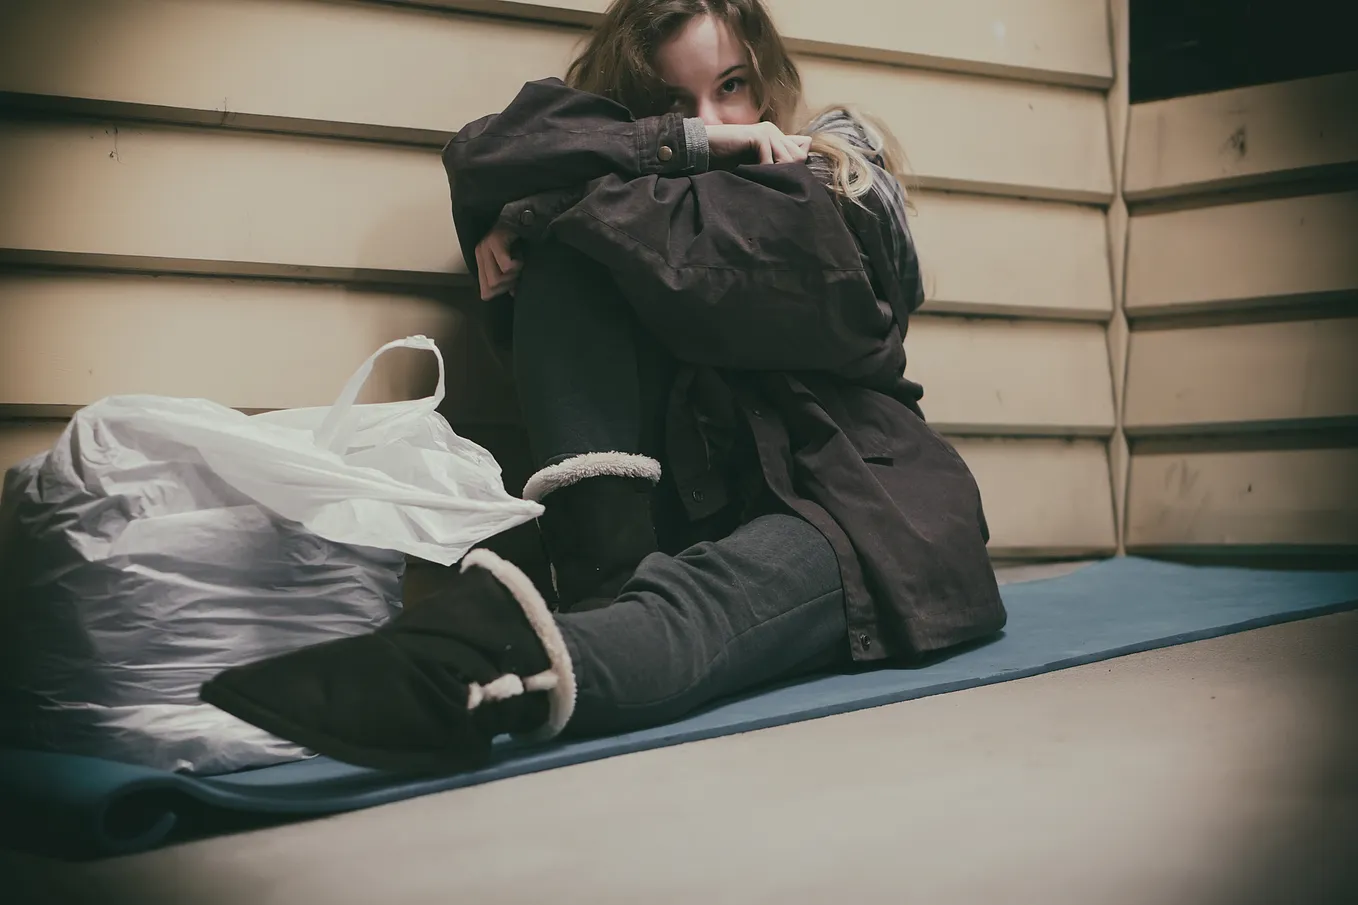 Why I’m Afraid of Being Homeless